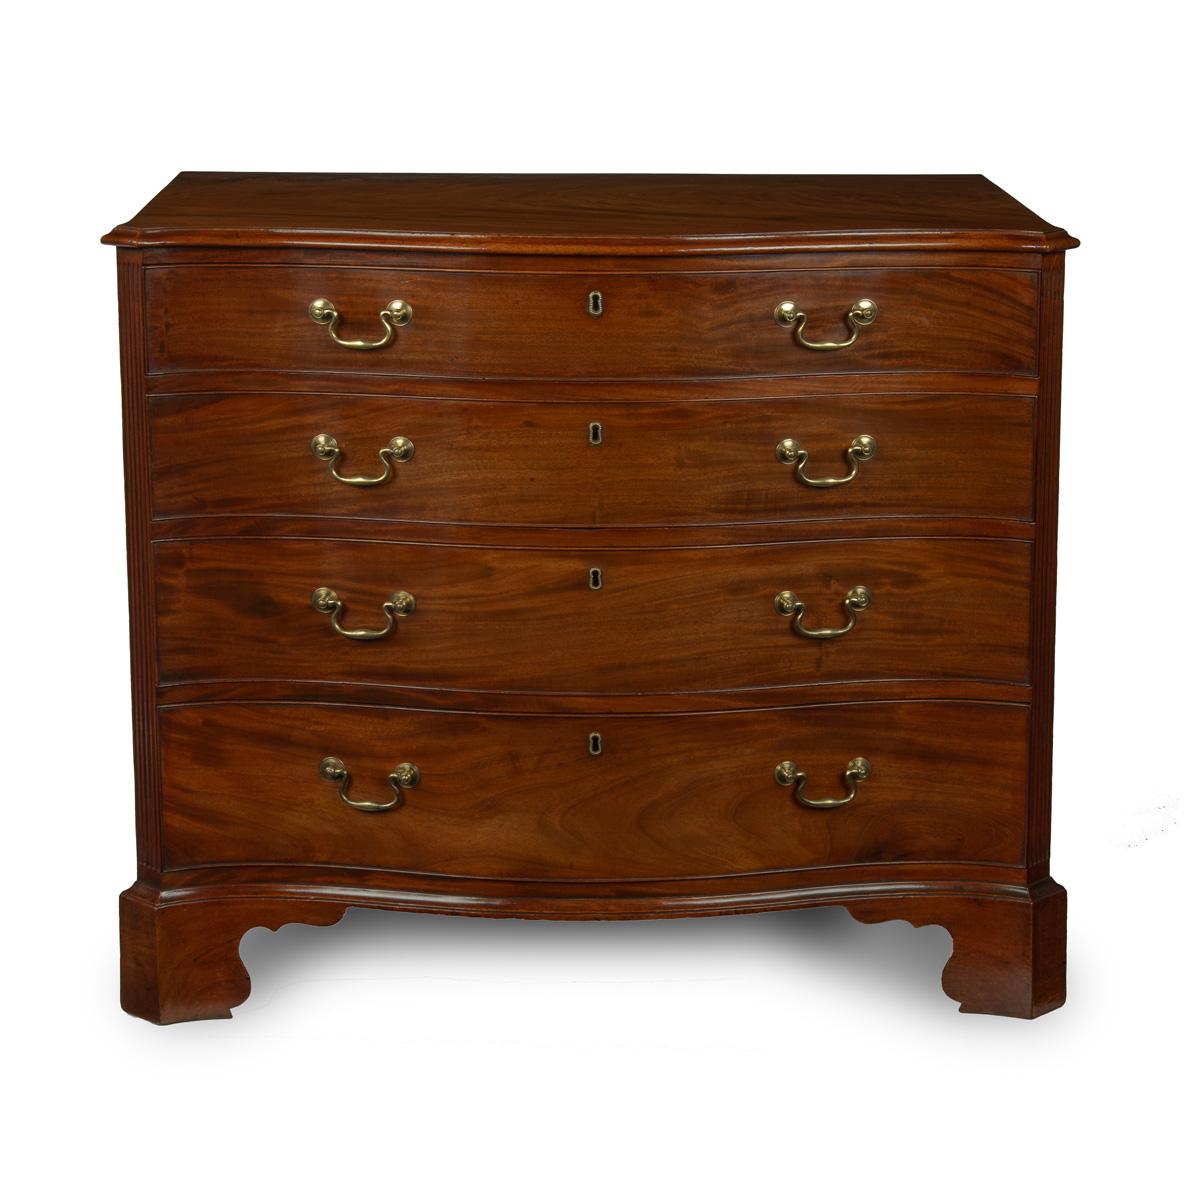 A George III mahogany four-drawer serpentine chest of drawers, the shaped top with fluted cut corners, with four graduated drawers, orginal  brass handels and bracket feet. English, circa 1790.

